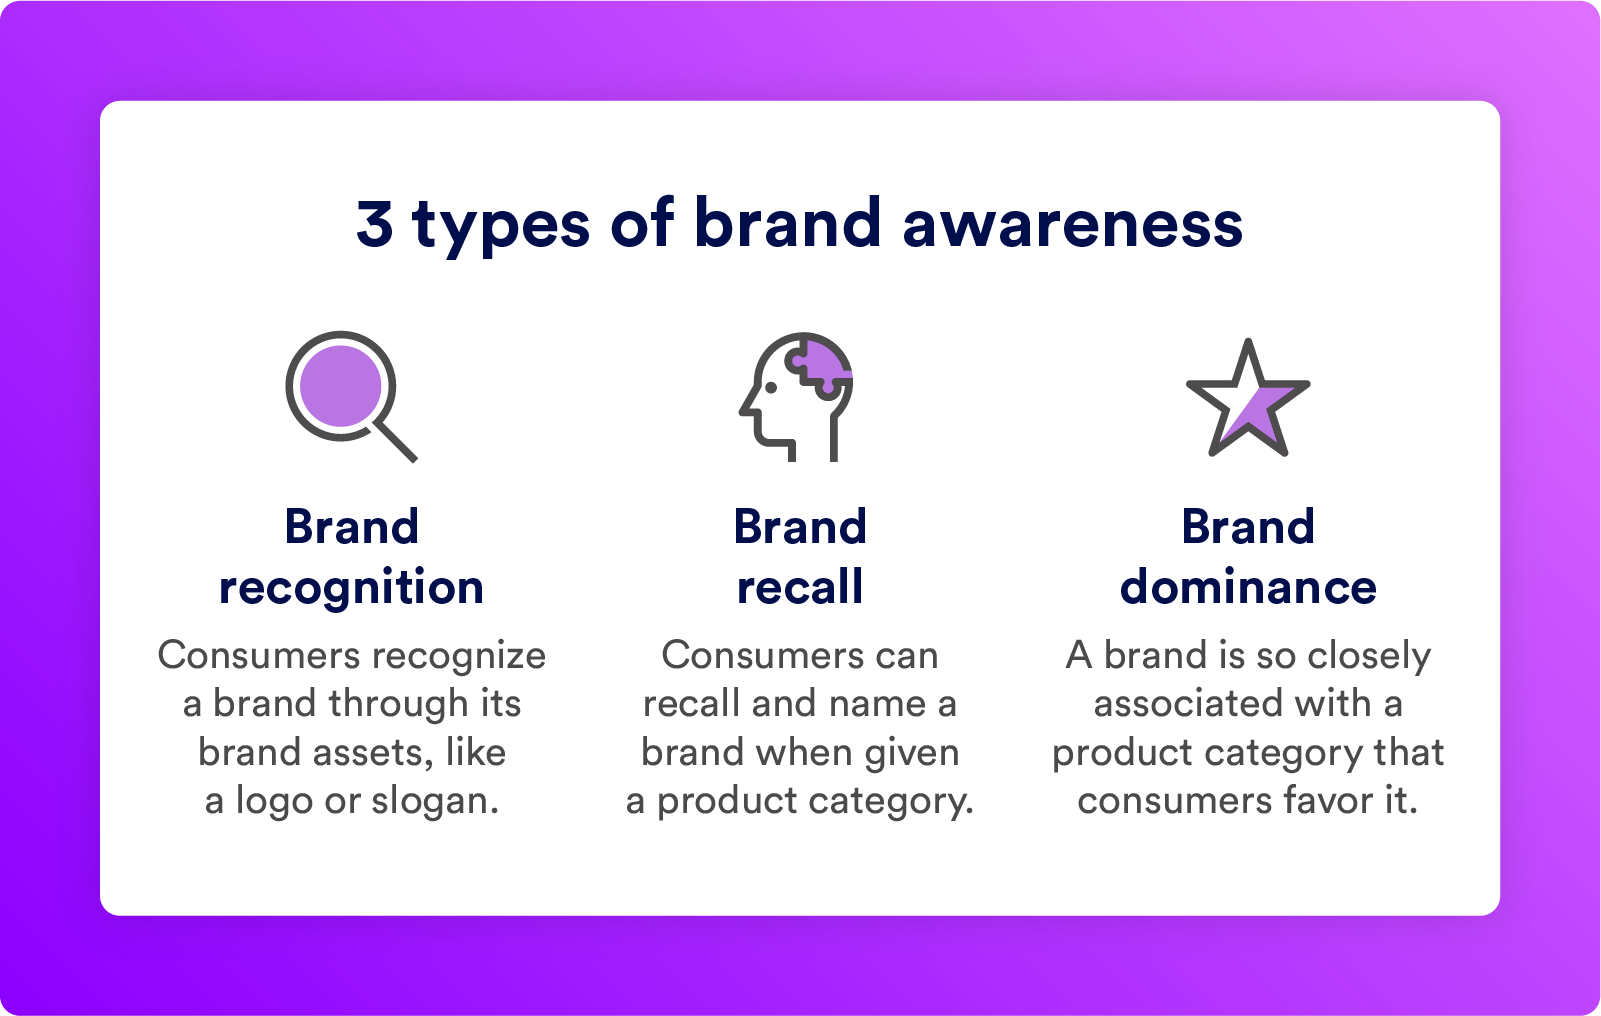 Recognition, recall, and dominance are types of brand awareness.